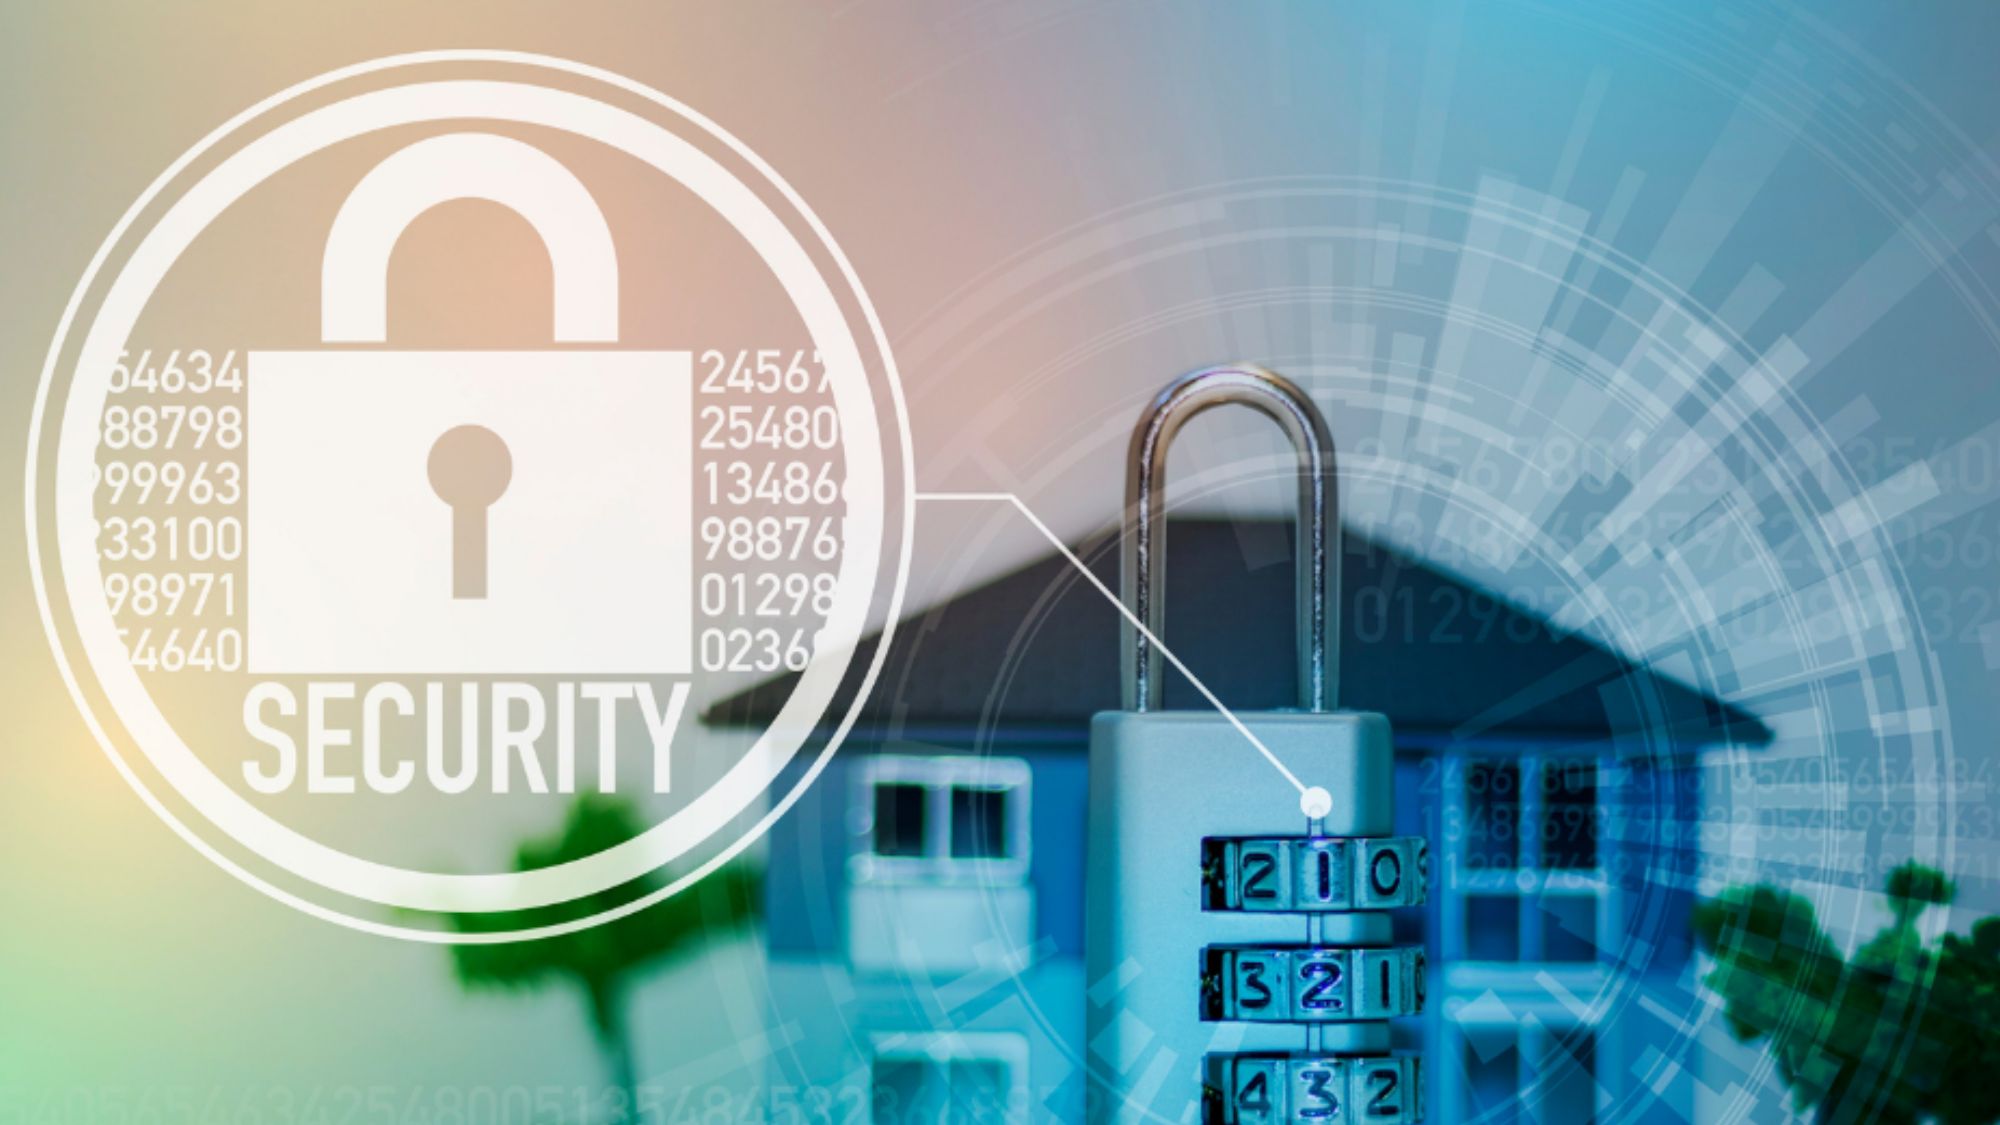 House and padlock on digital background symbolize protection and safety for rental property